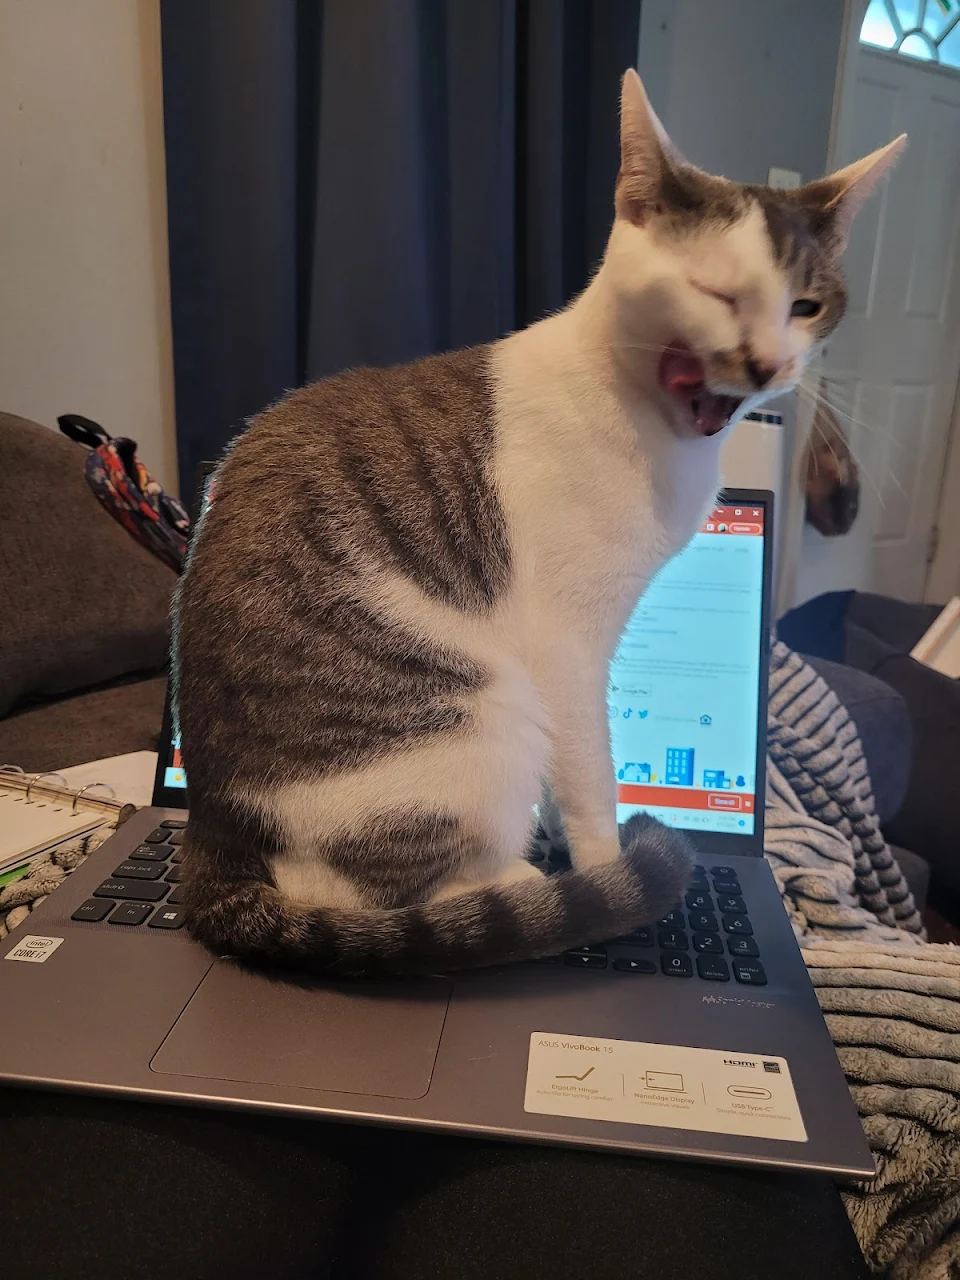 no work for you hooman